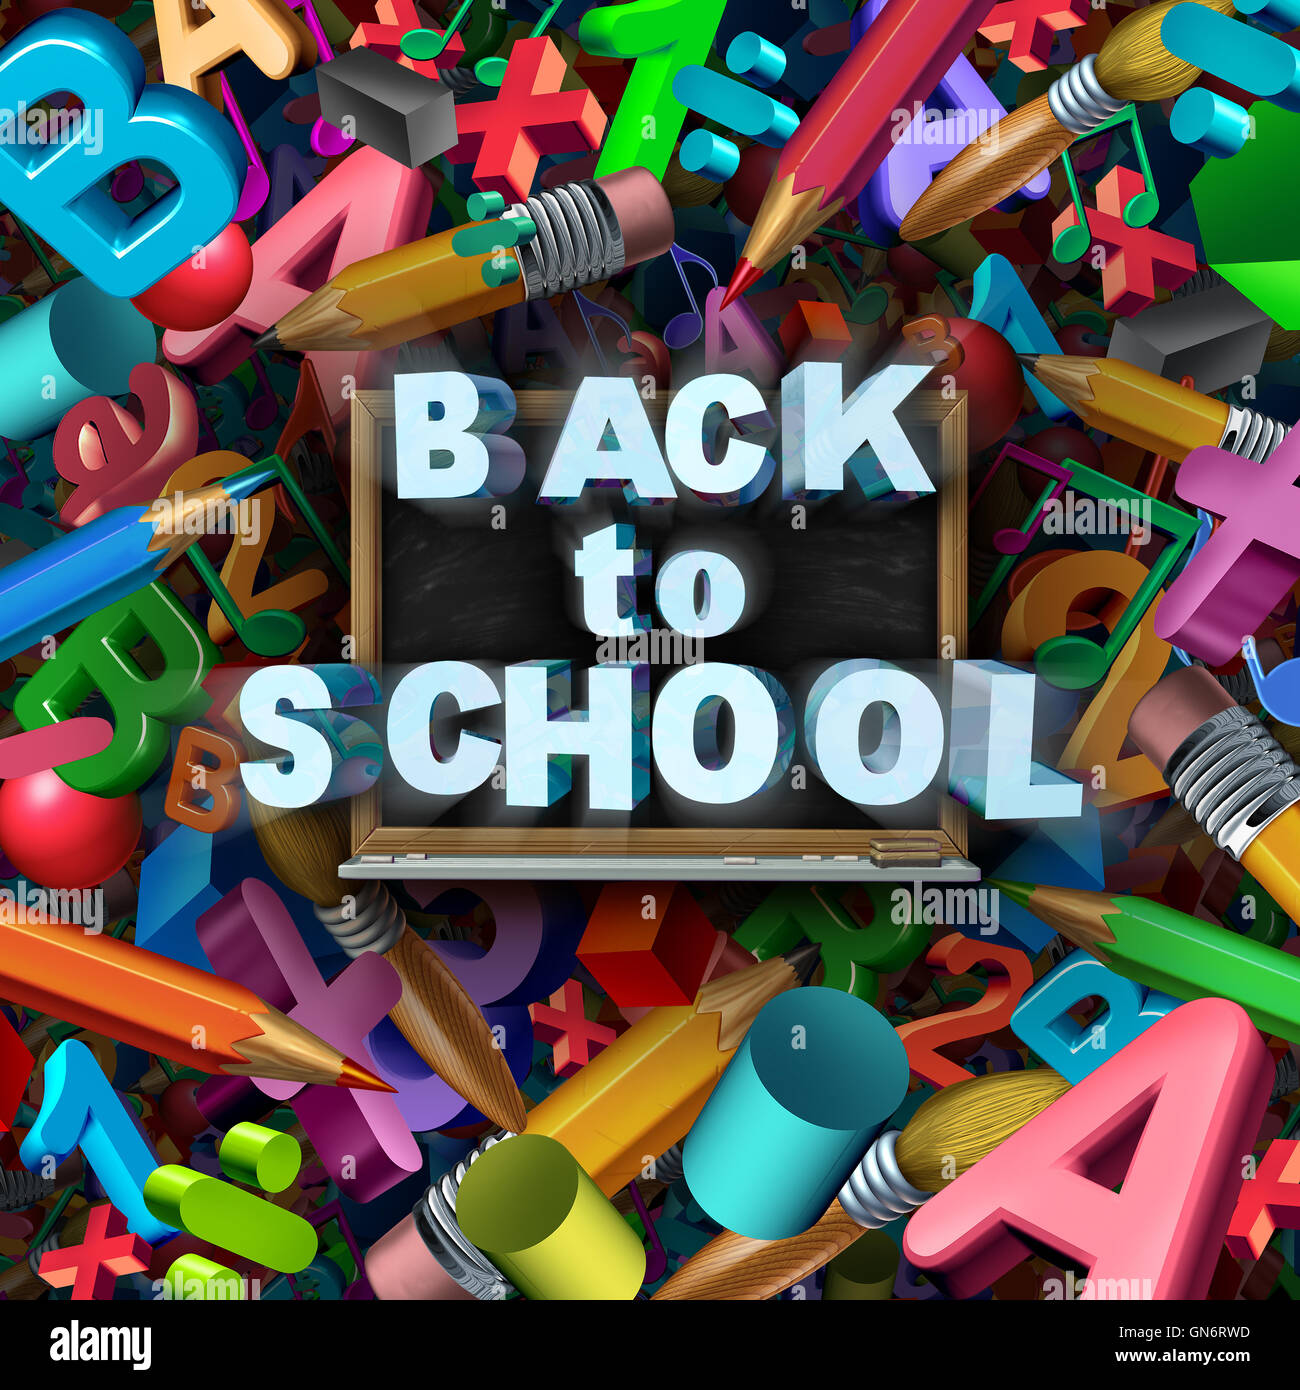 Back to school concept as a group of classroom teaching and learning supplies and education symbols with a chalkboard as an icon for the start of a new academic year for elementary or grade schools as a 3D illustration. Stock Photo